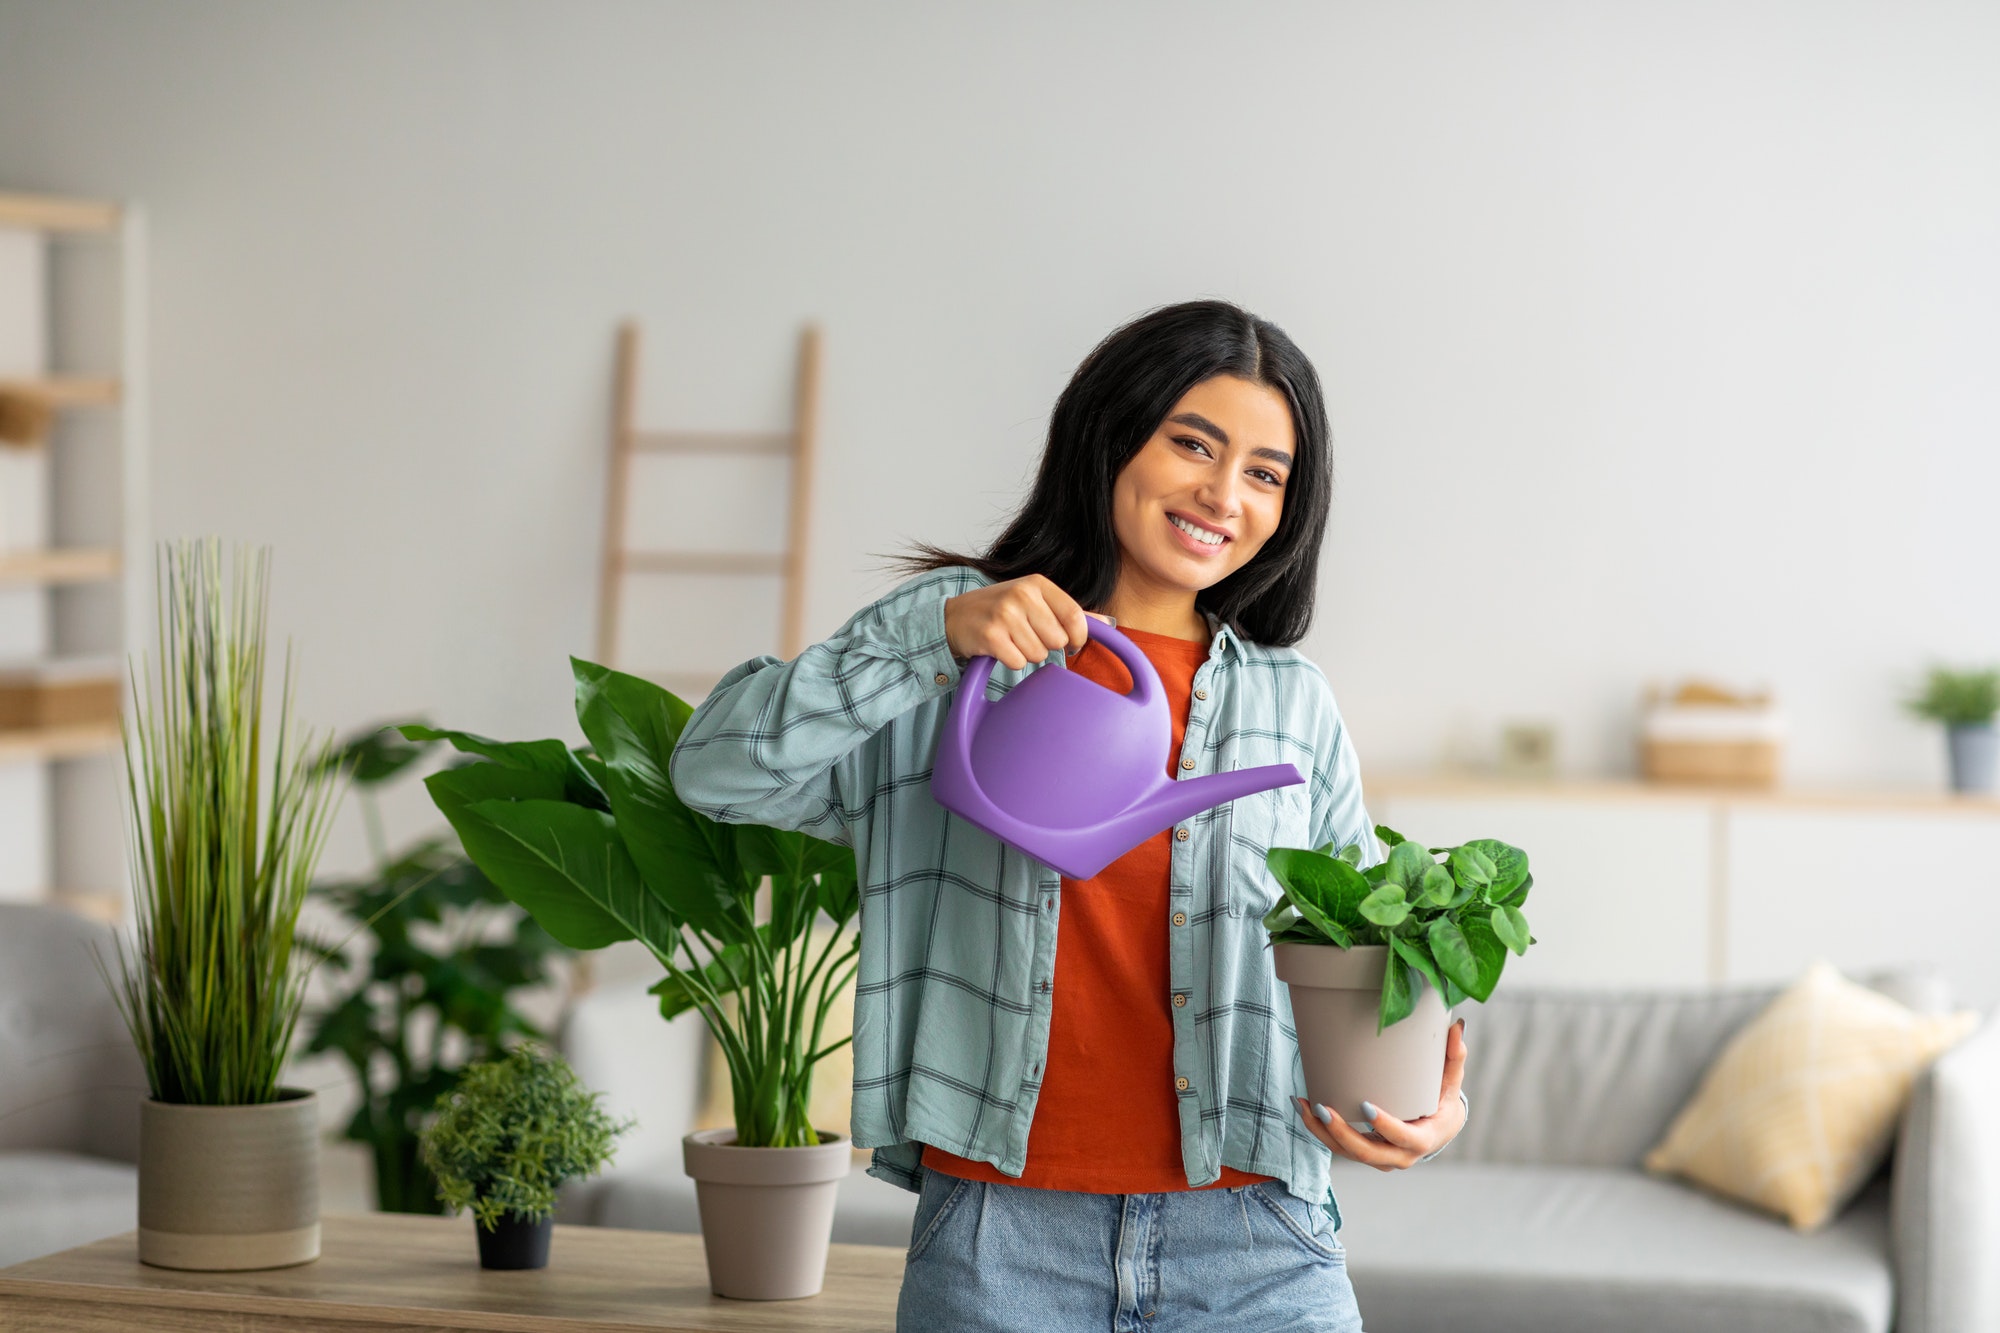 Domestic life. Portrait of beautiful young Arab woman taking care of houseplants, gardening at home